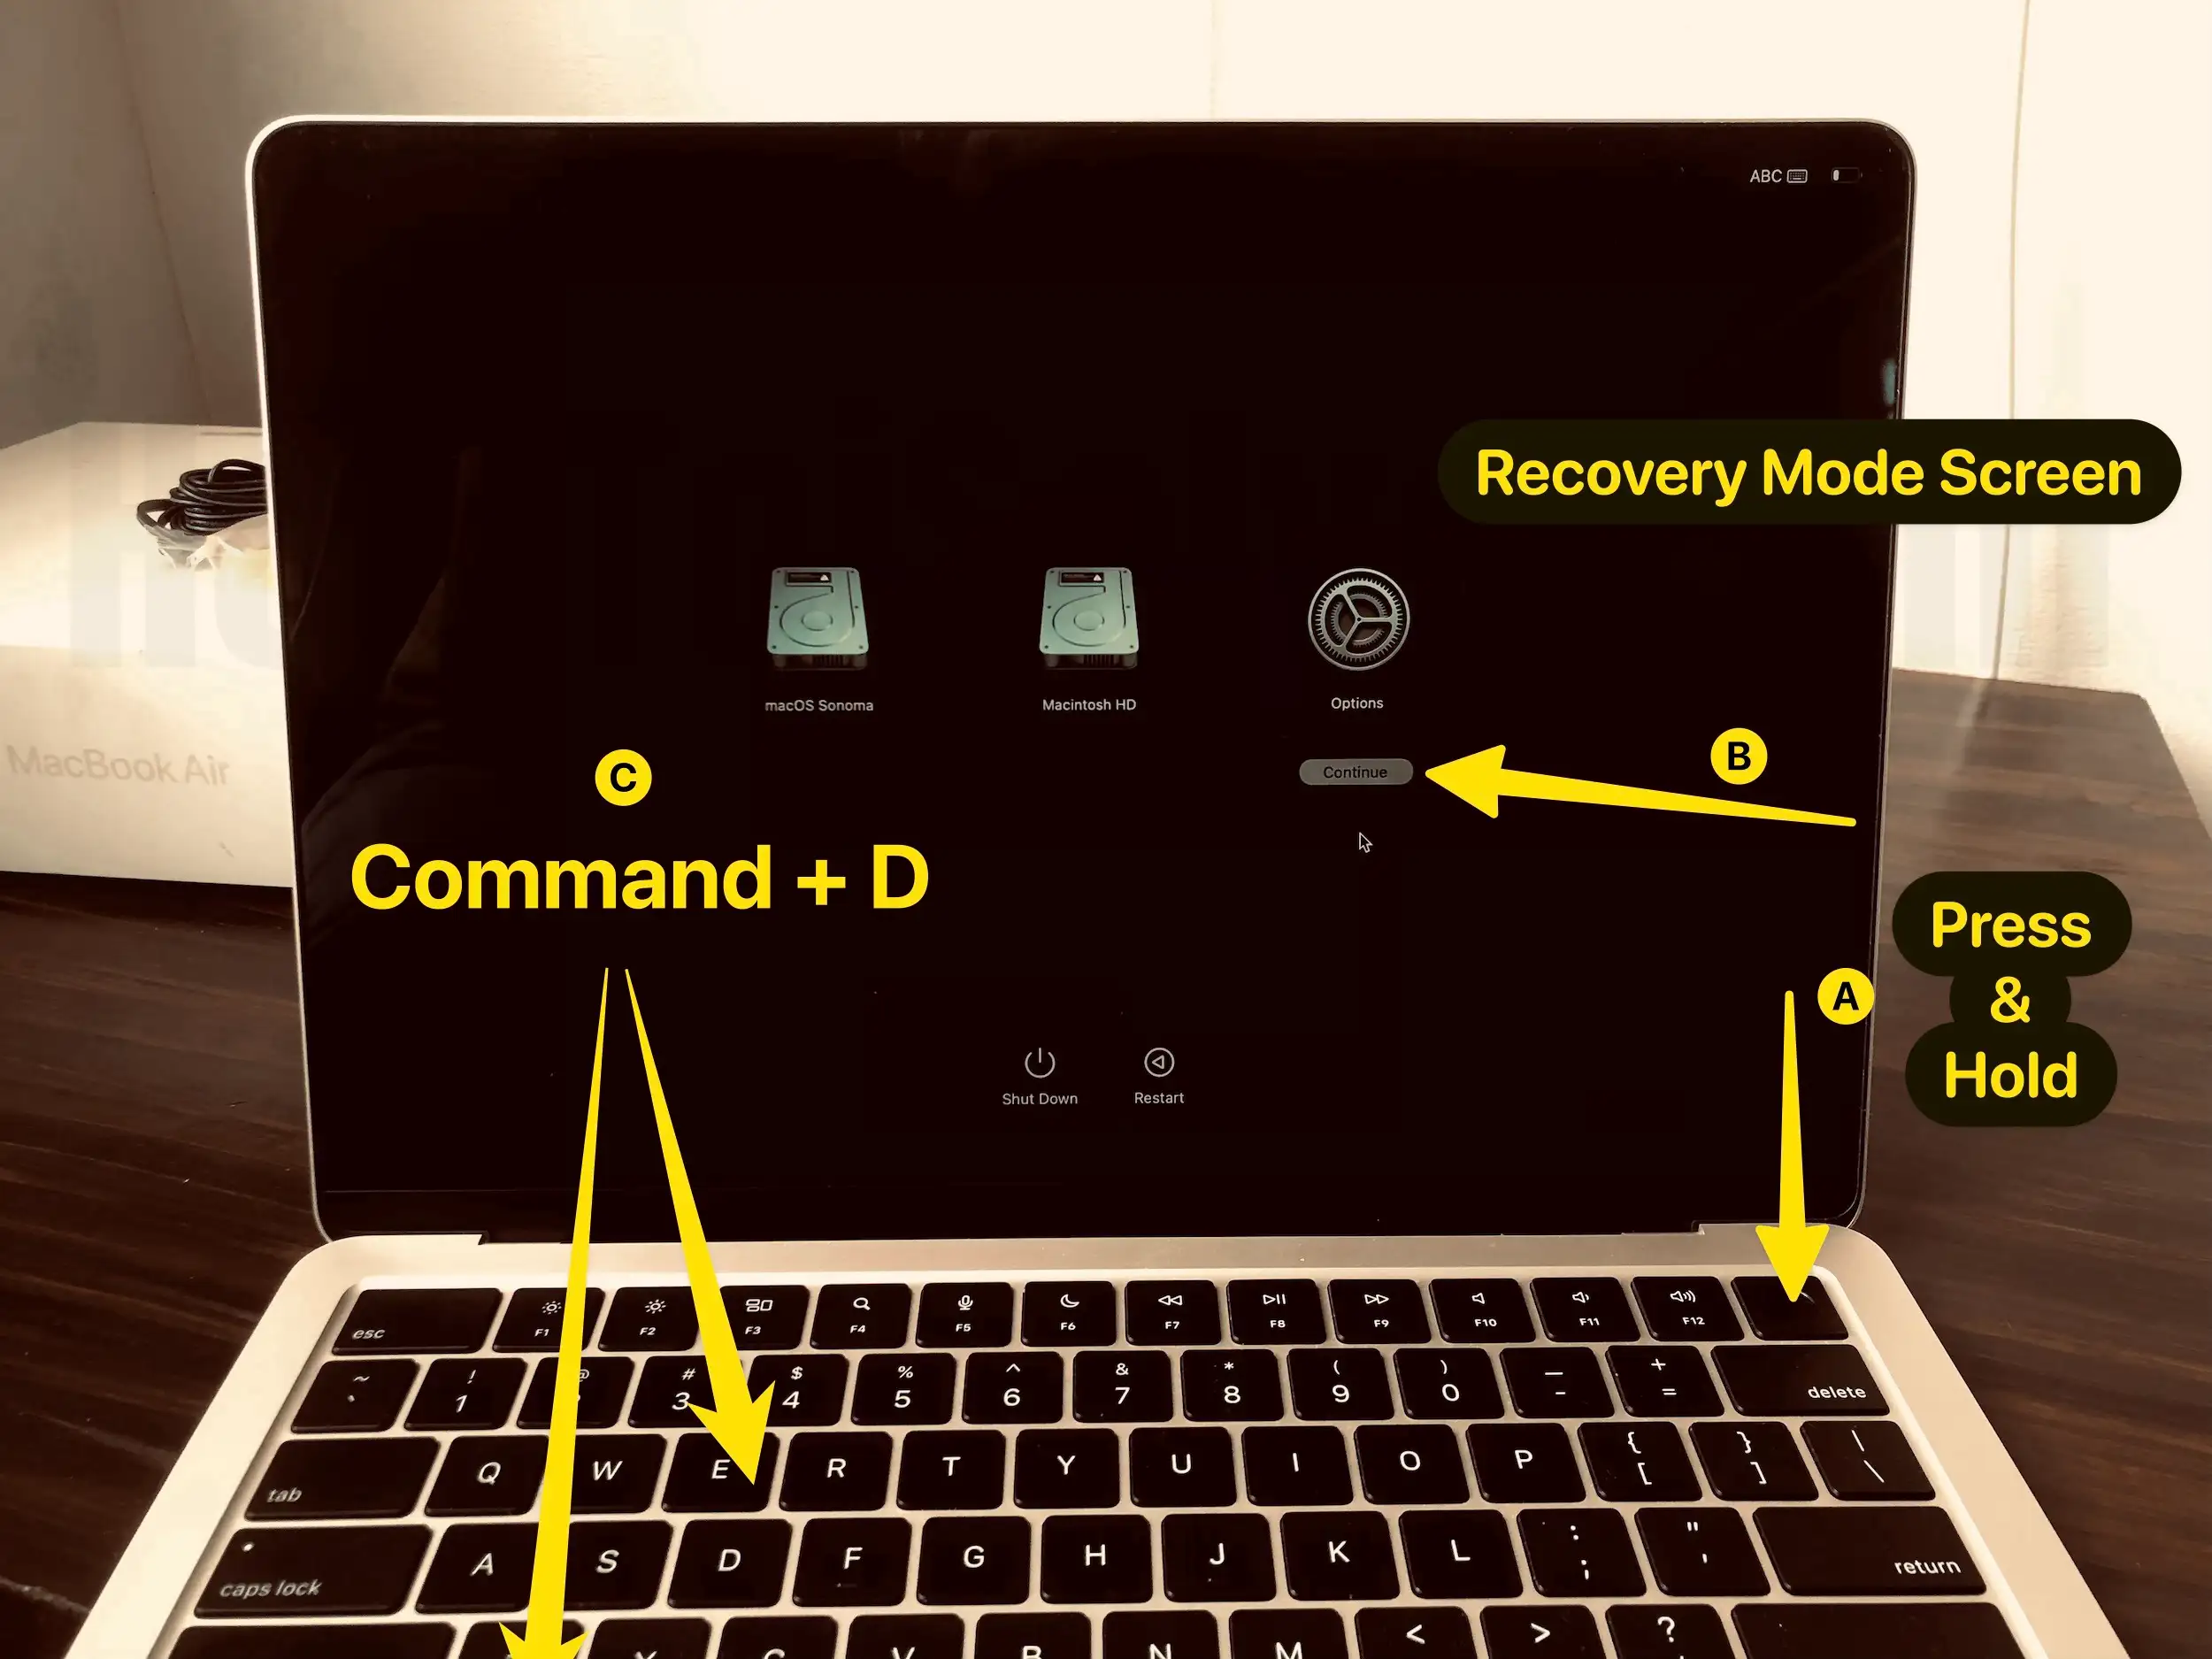 Run Diagnostic on Mac with Apple Silicon Chip